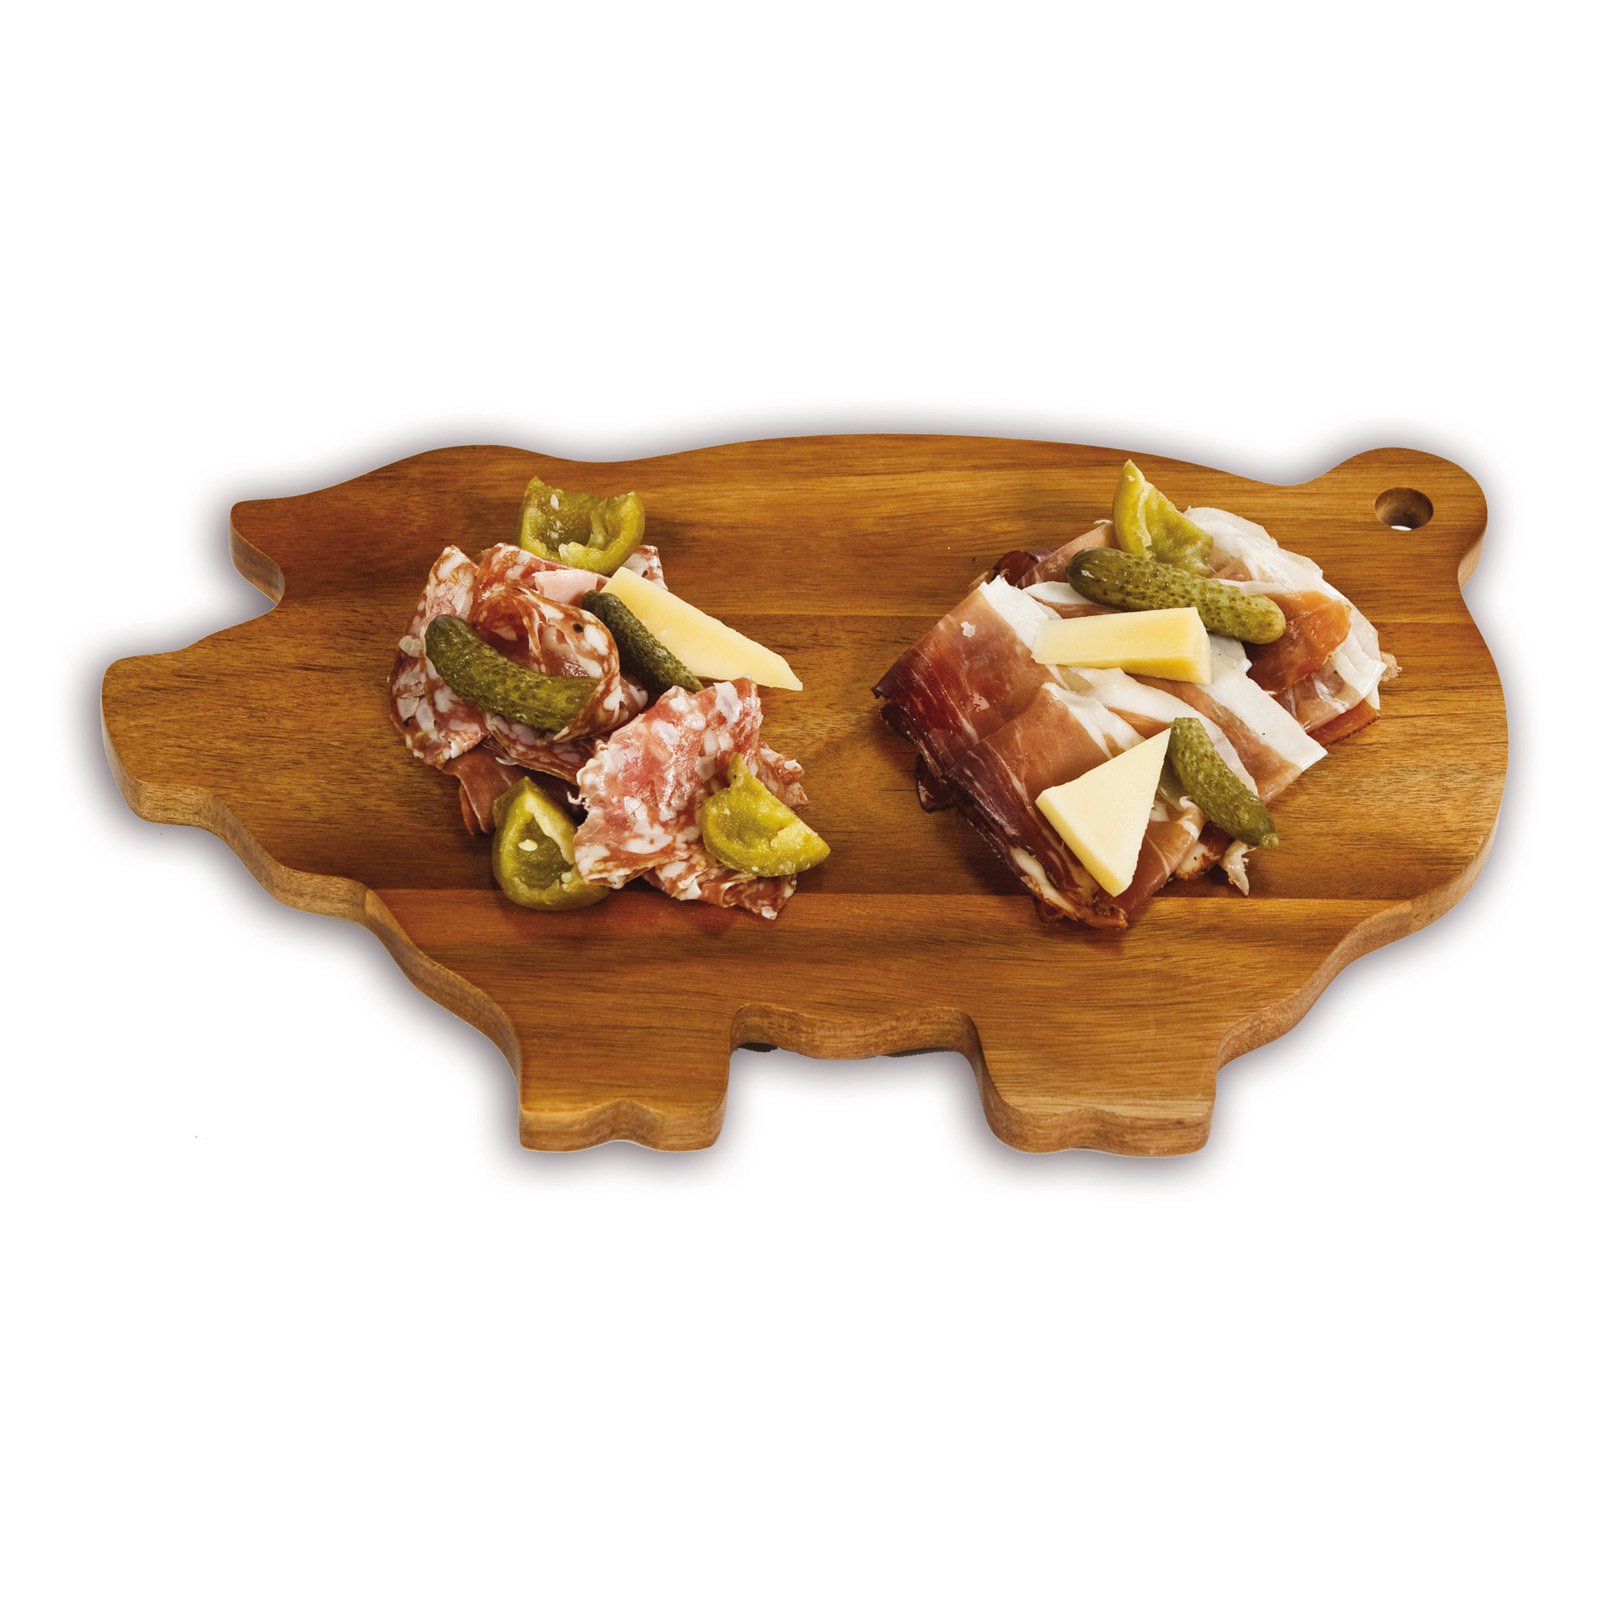 Picnic Plus Pig Shaped Cutting Board - image 2 of 2